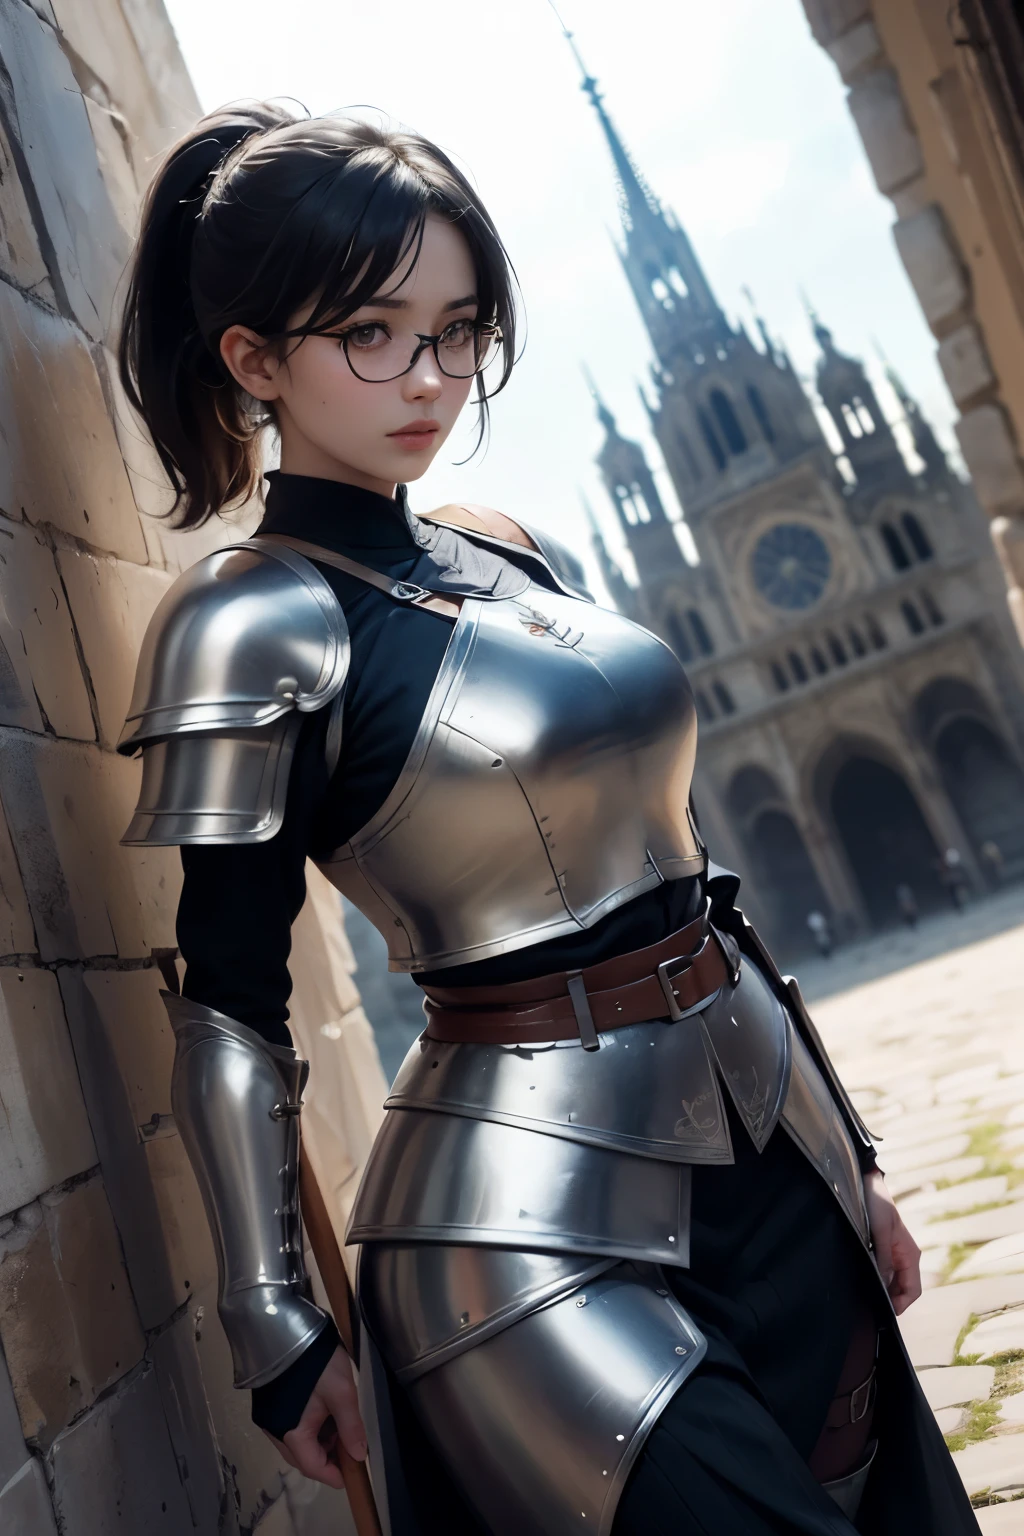 ((wide angle shot of the Hundred Years' War in France)), a beautiful woman, black hair in a ponytail, bangs, wearing glasses, wearing Jeanne d'Arc armor